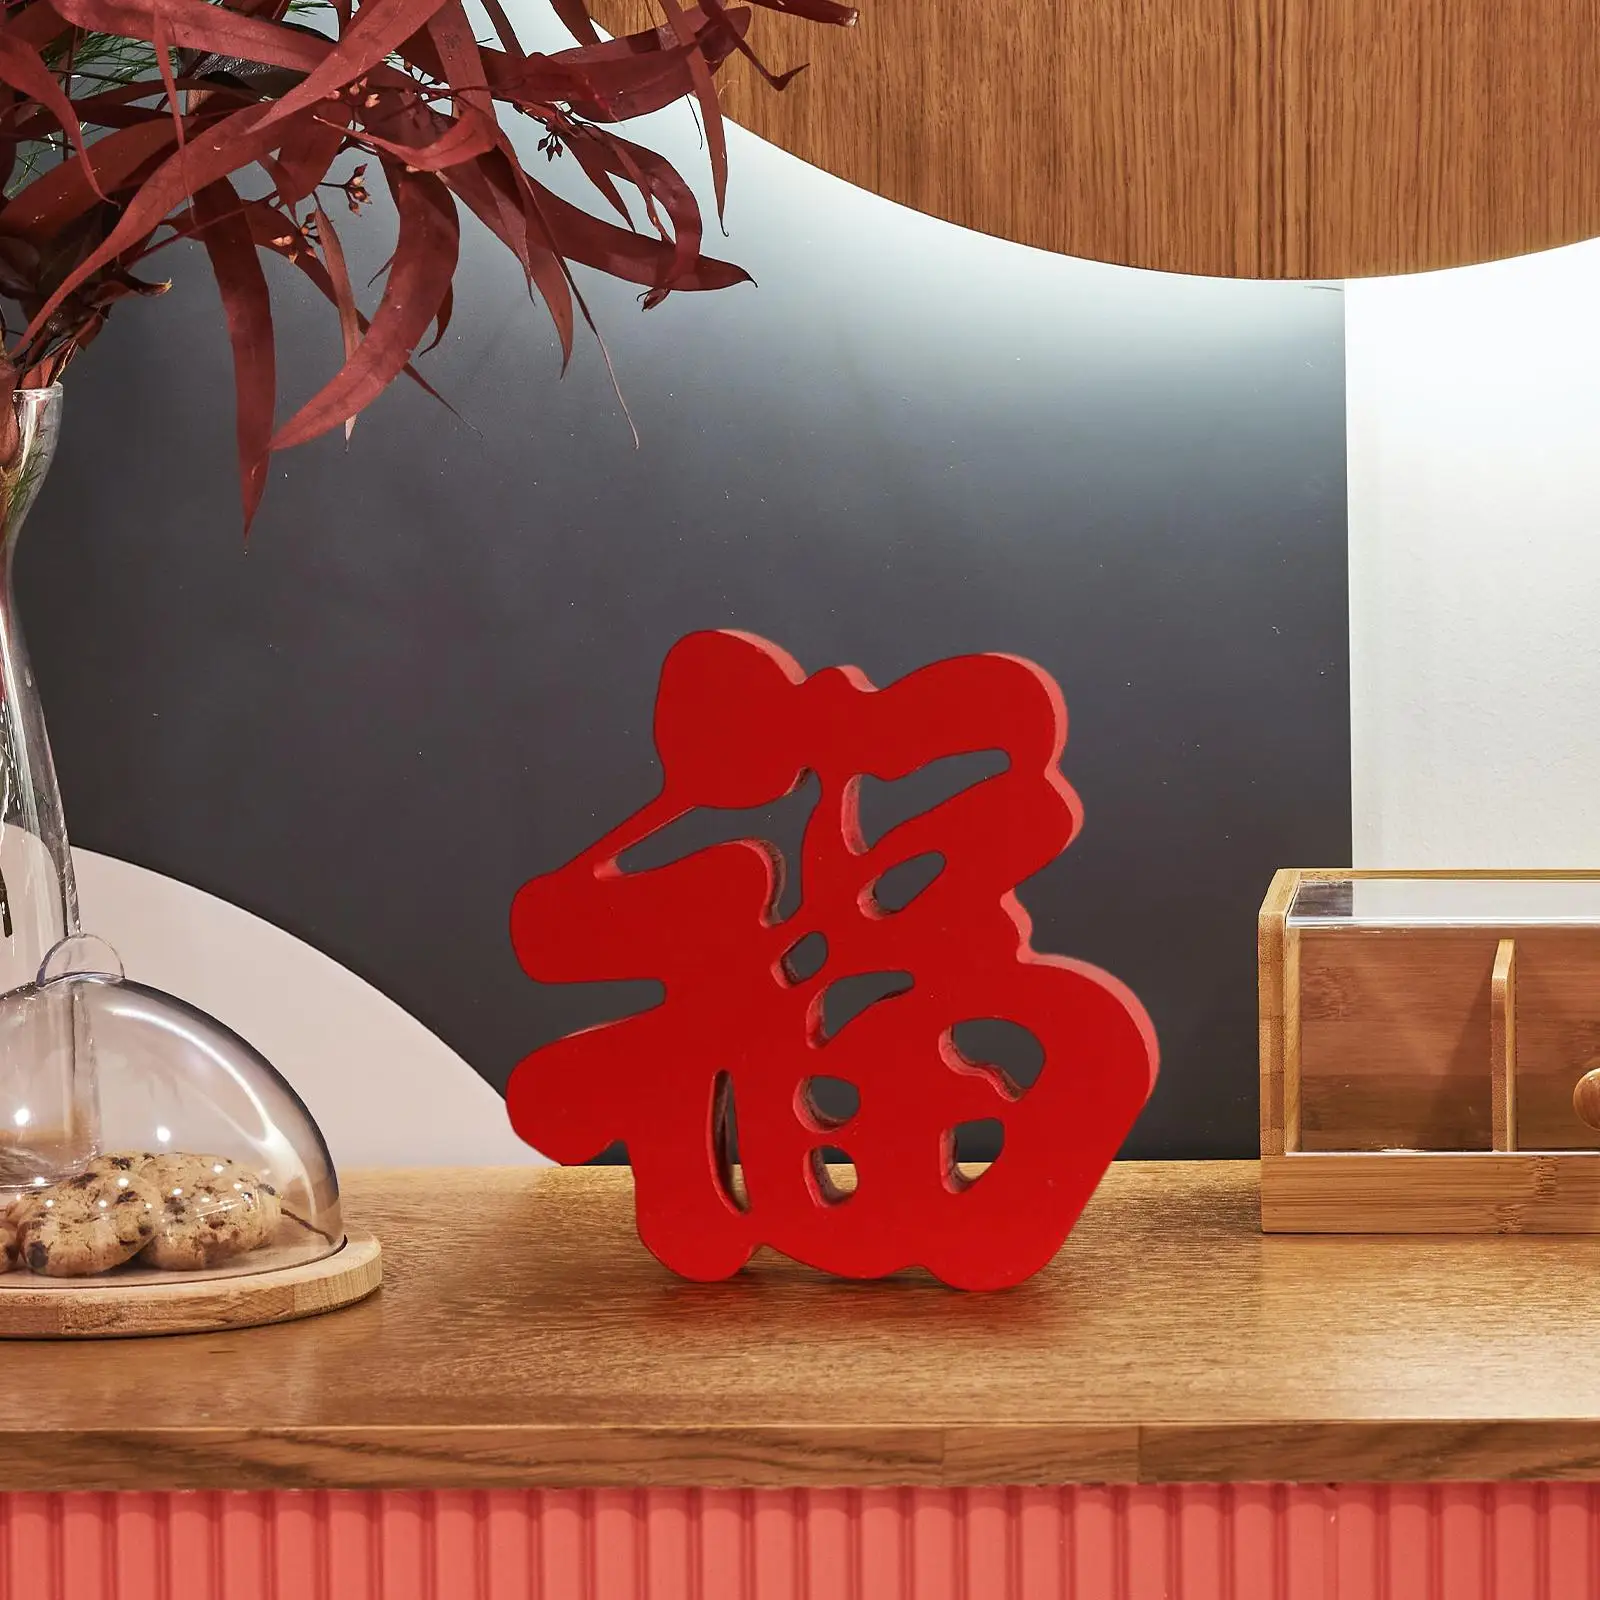 Festival Chinese Happiness Decoration Desk Statues Wood Sculpture Red Fu Character for Home Entrance Decor Housewarming Gifts